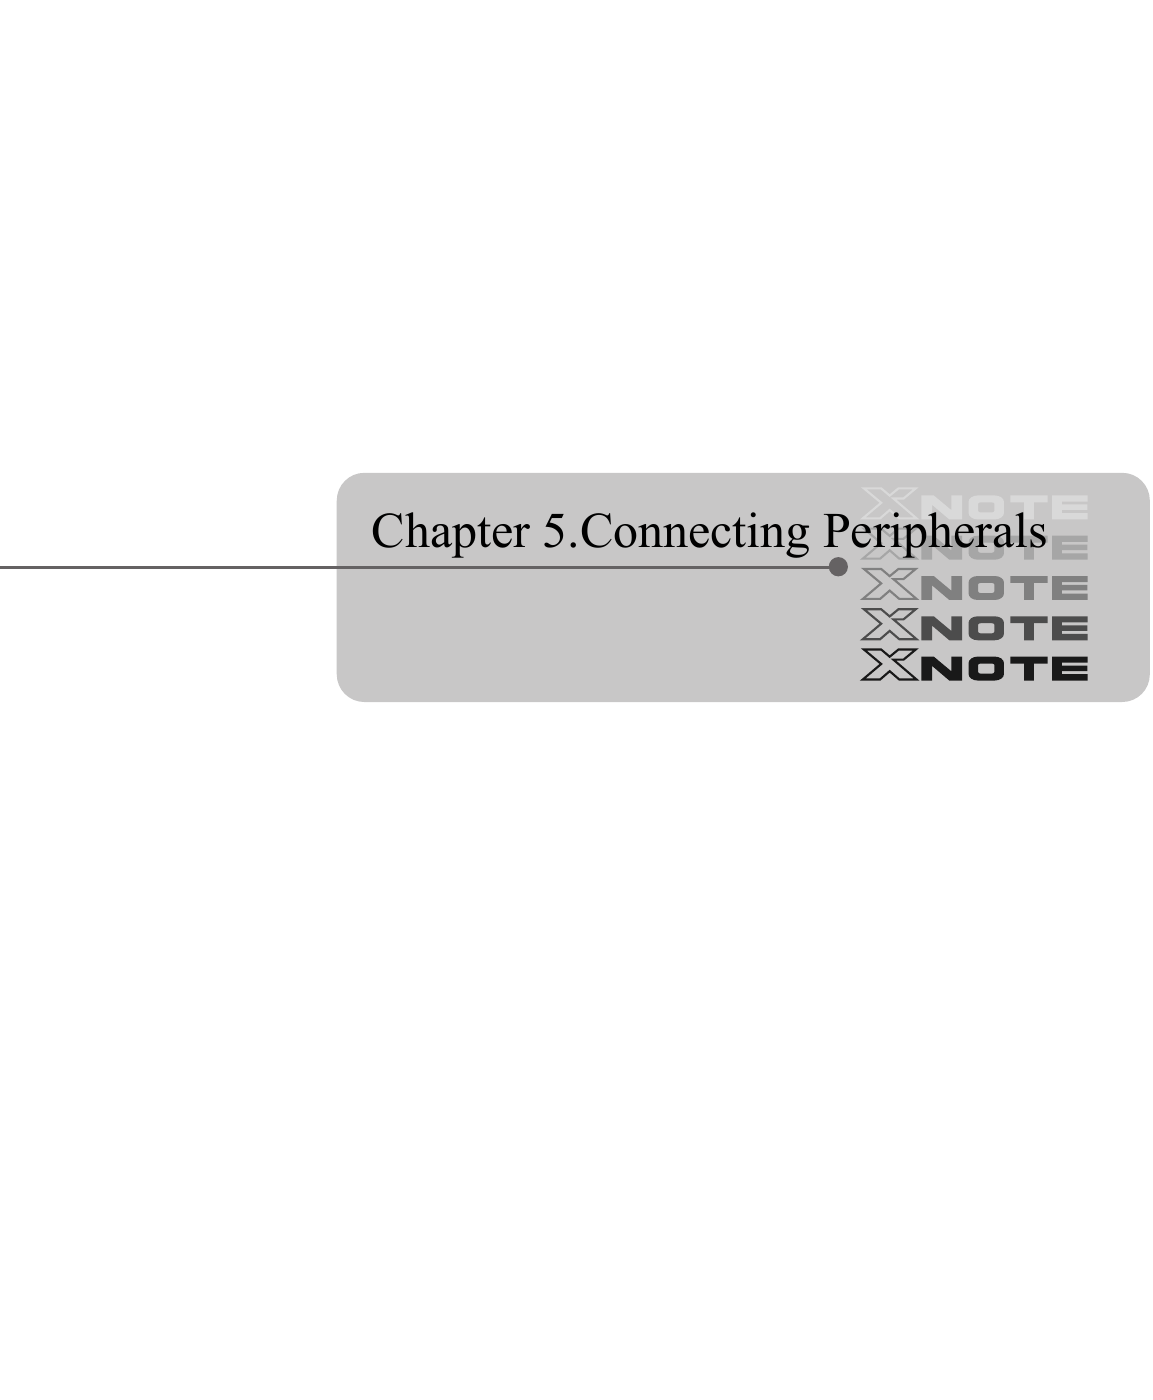  Chapter 5.Connecting Peripherals